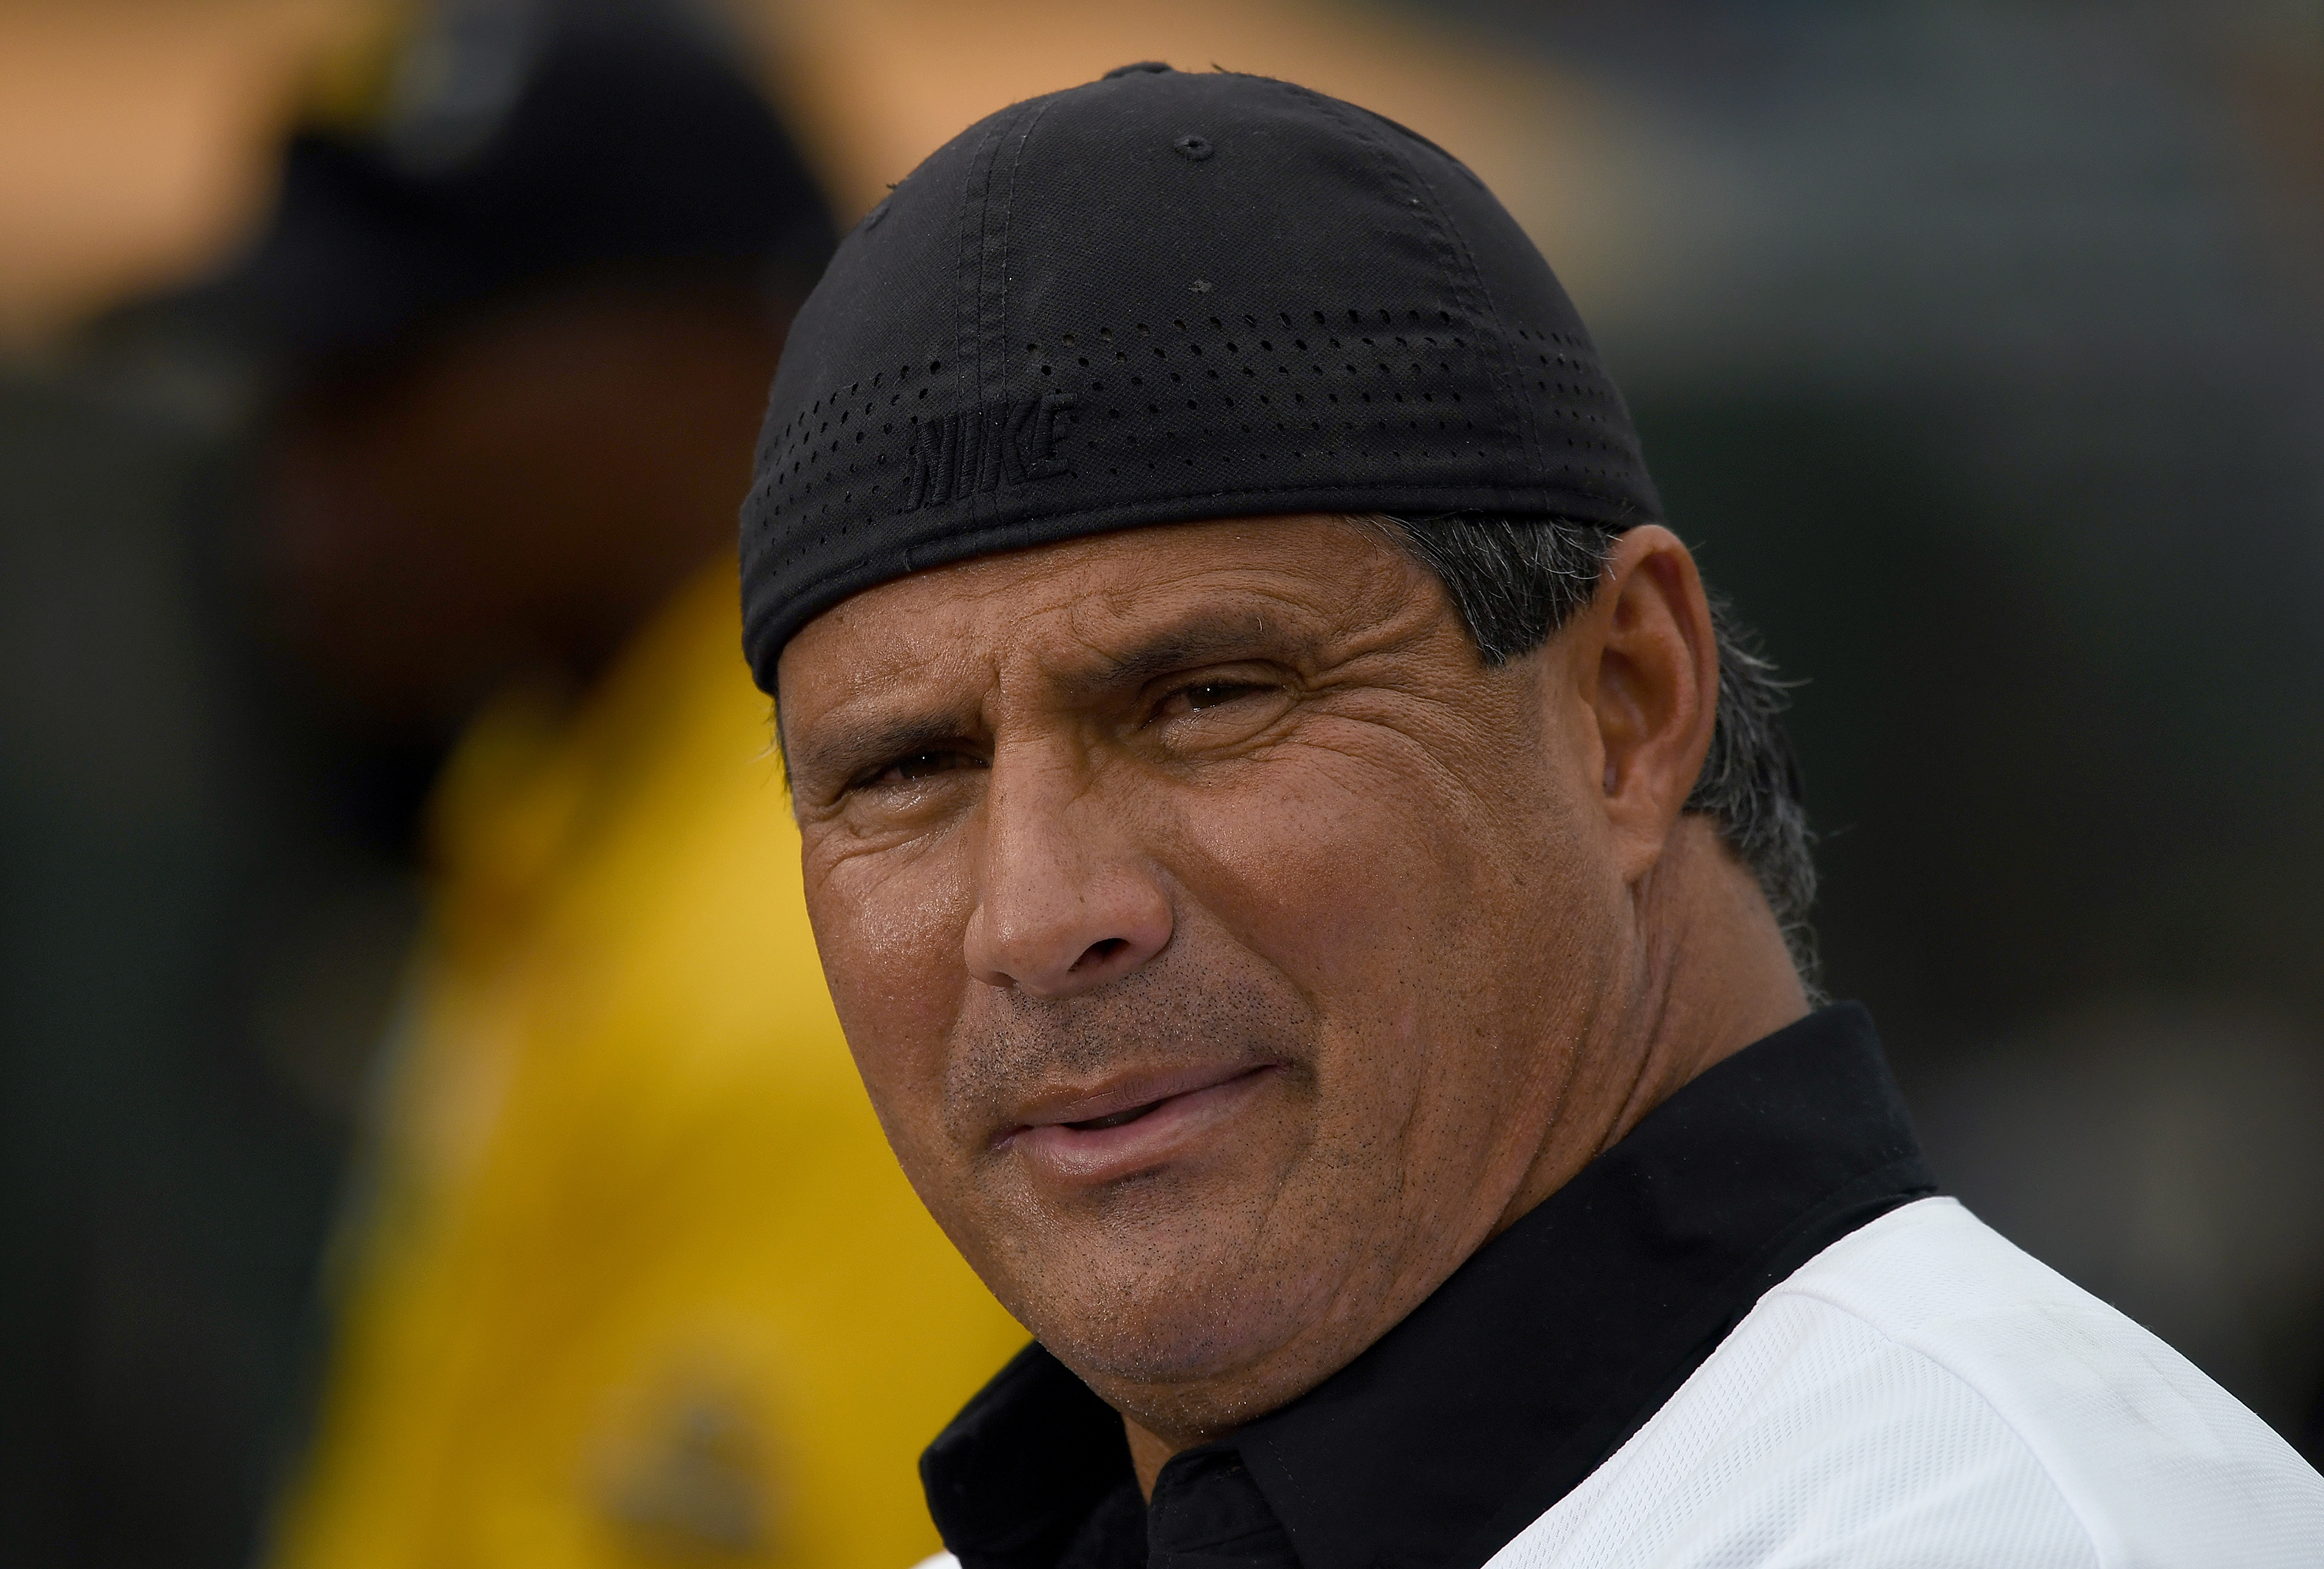 Jose Canseco claims to have seen the Super Bowl already